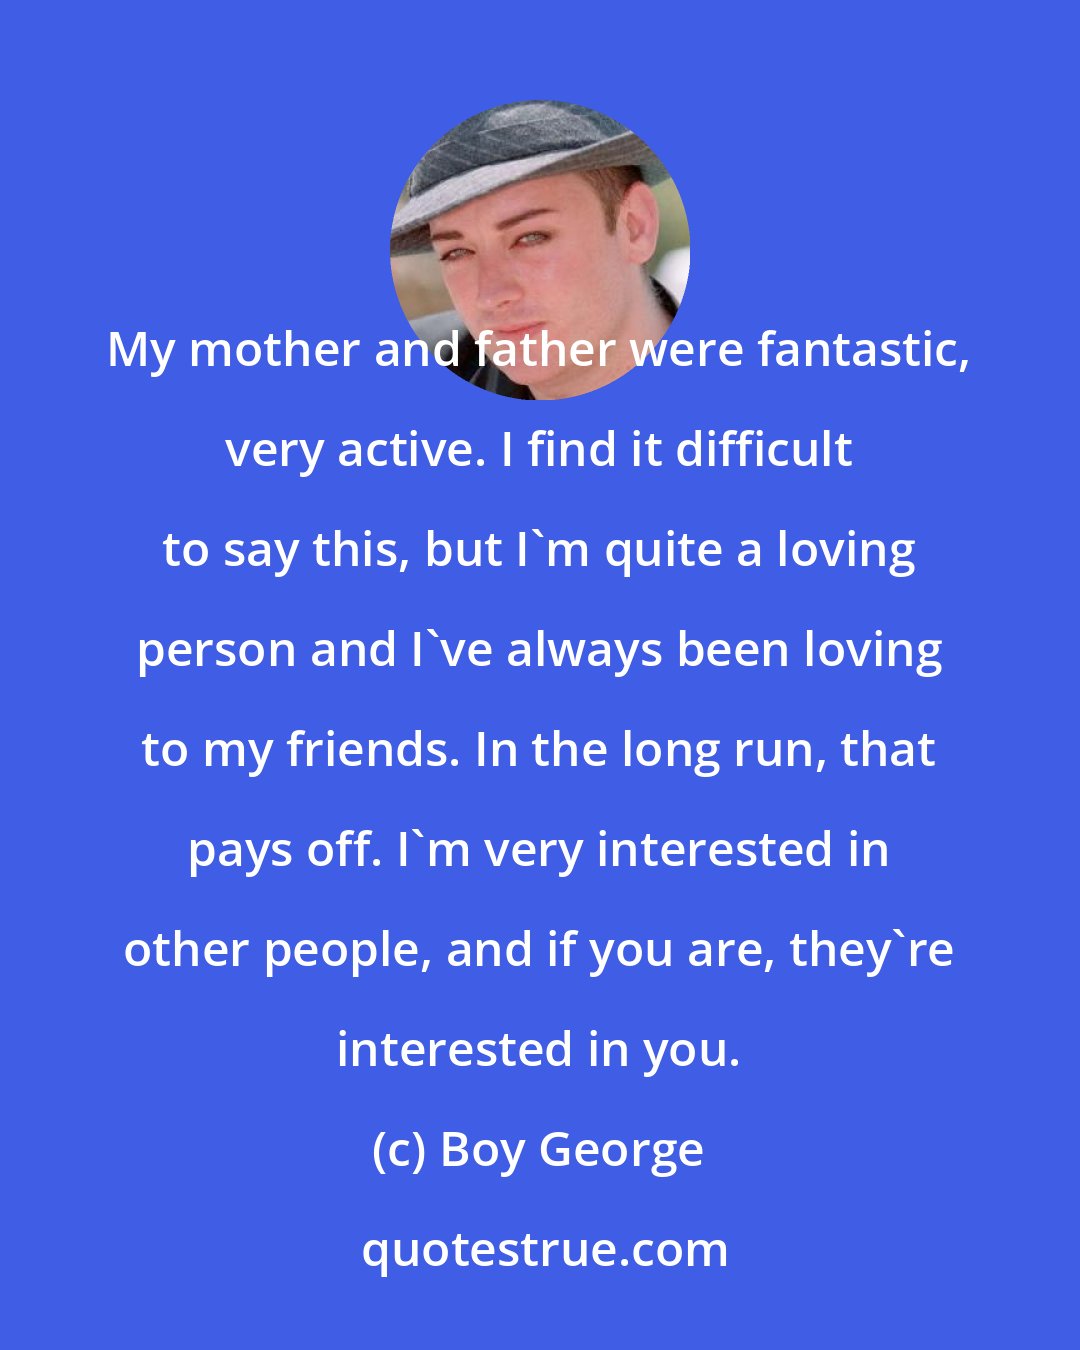 Boy George: My mother and father were fantastic, very active. I find it difficult to say this, but I'm quite a loving person and I've always been loving to my friends. In the long run, that pays off. I'm very interested in other people, and if you are, they're interested in you.